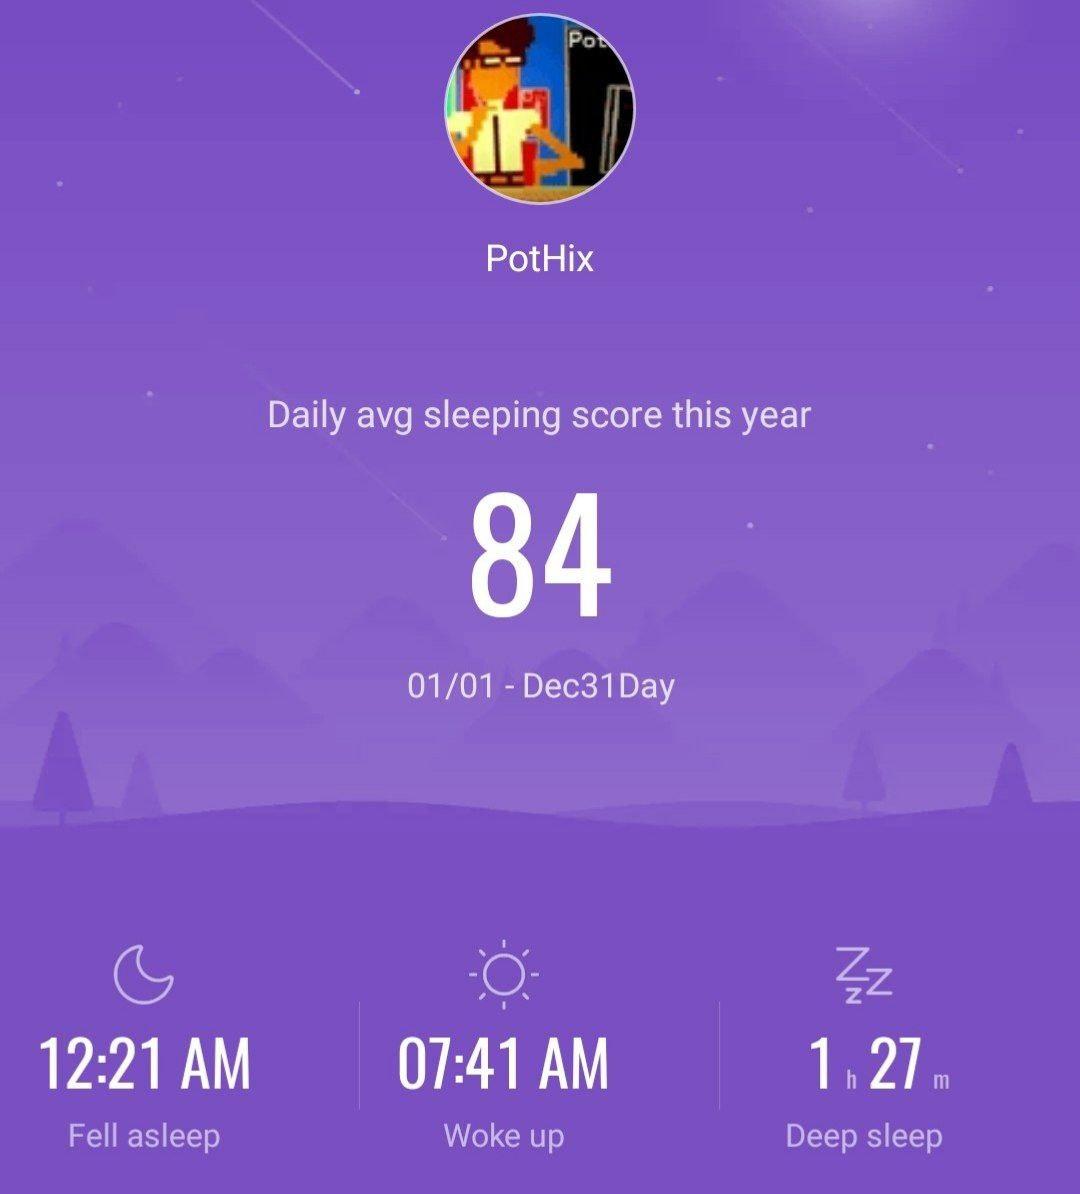 A screenshot that shows the summary of my sleep data from 2020